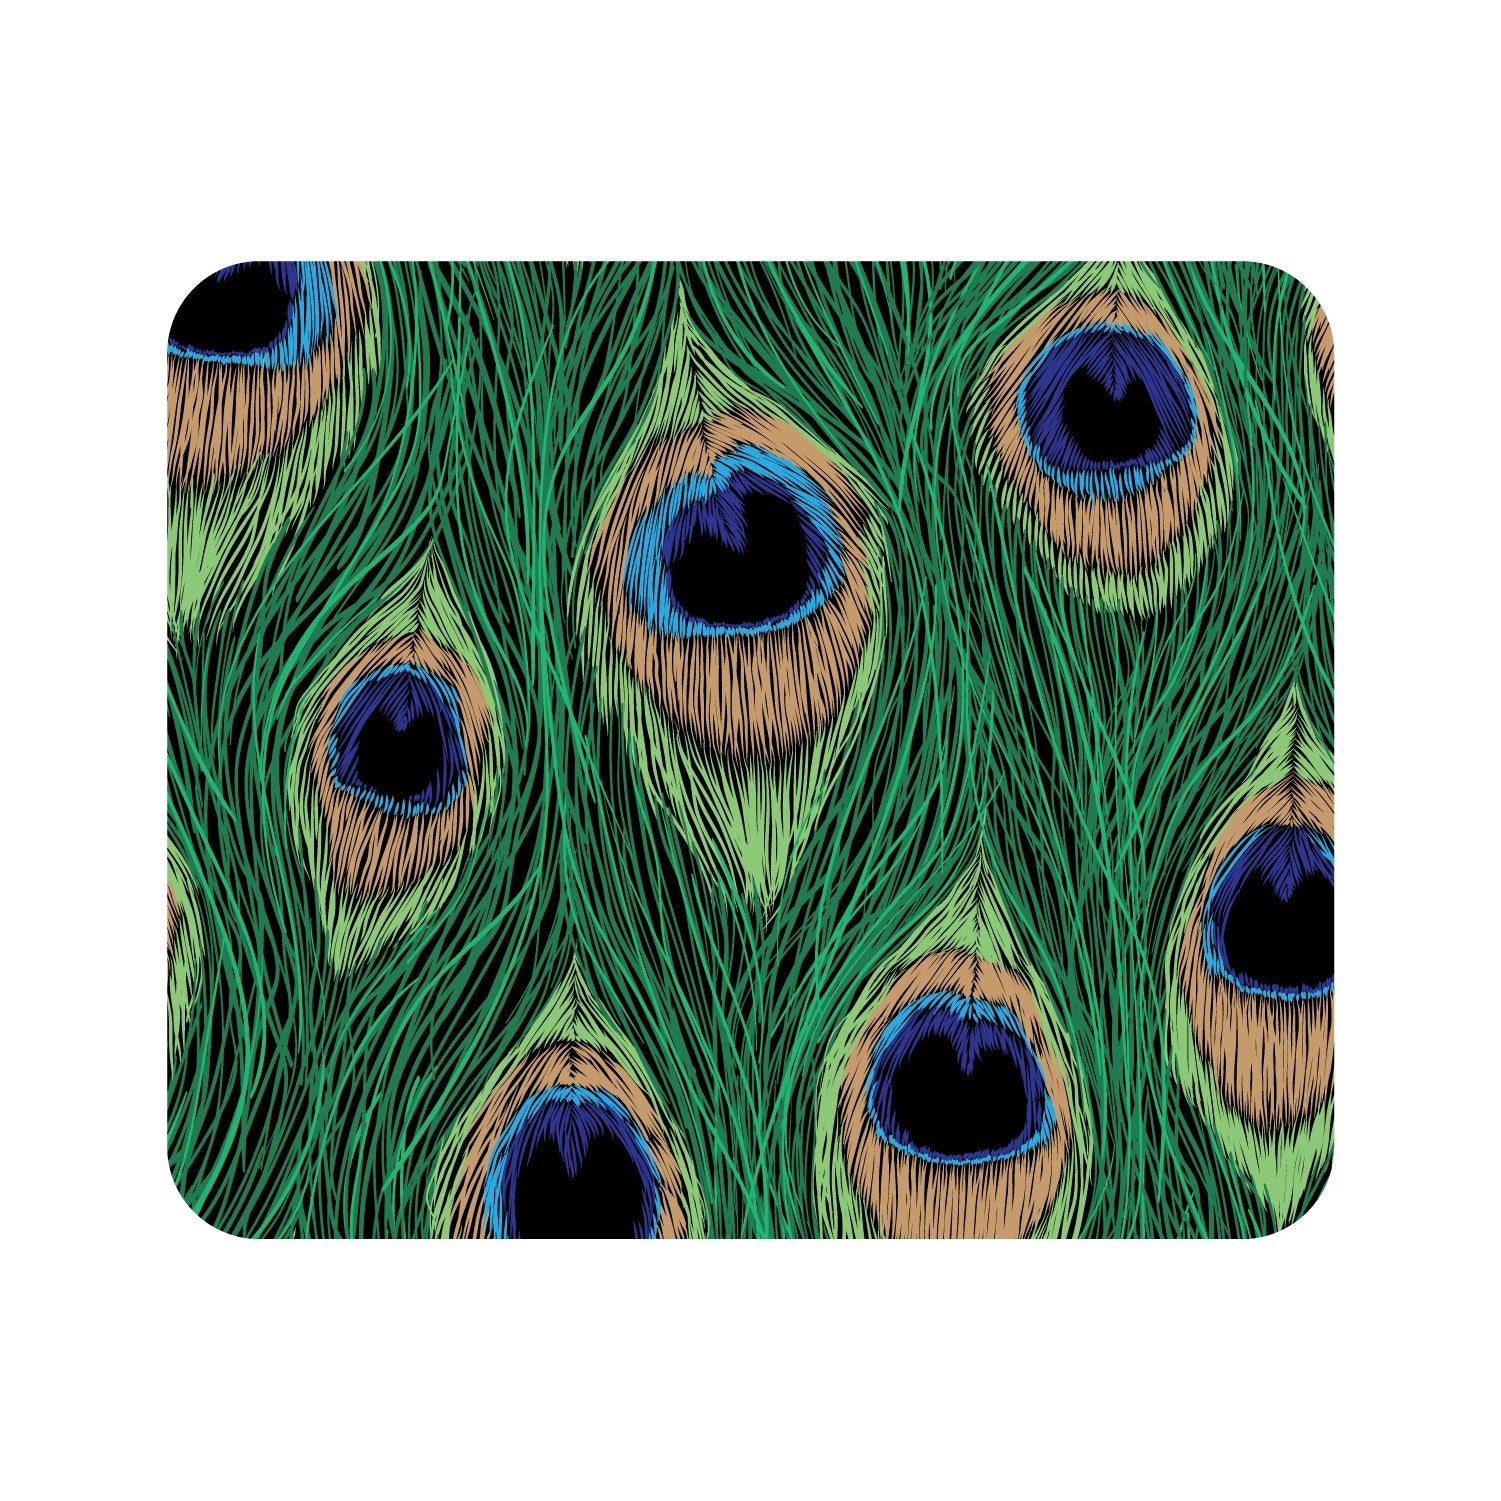 OTM Essentials Prints Series Mouse Pad, Feathers Peacock